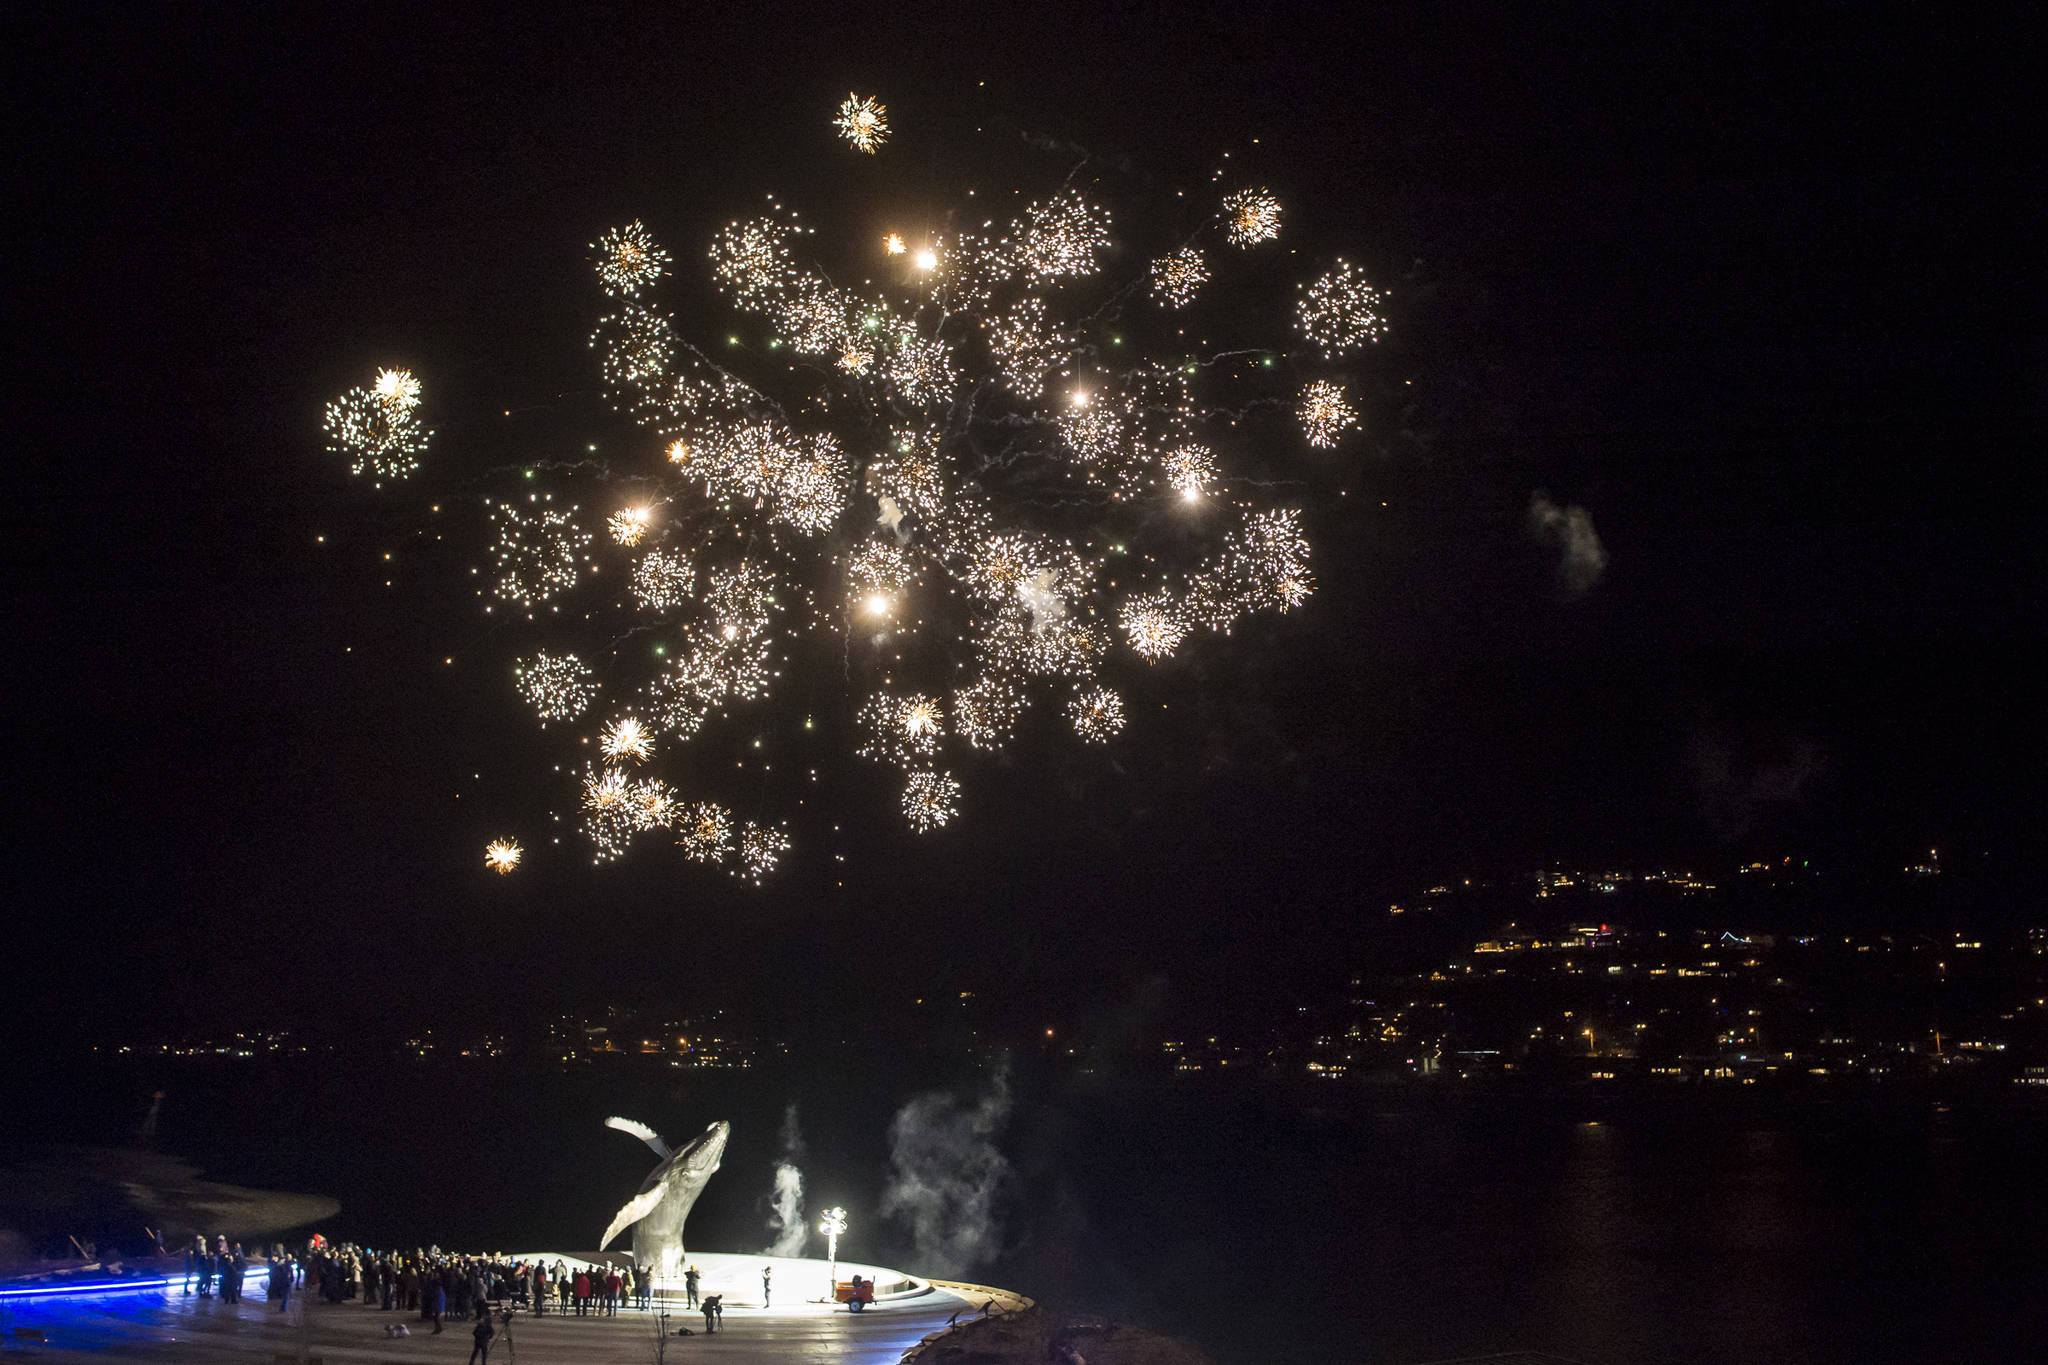 Fireworks are set off as hundreds of Juneau residents attend a candlelight vigil at Mayor Bill Overstreet Park on Friday, Feb. 1, 2019, in 8-degree weather for the Guardian medical flight crew that went missing this week. (Michael Penn | Juneau Empire)